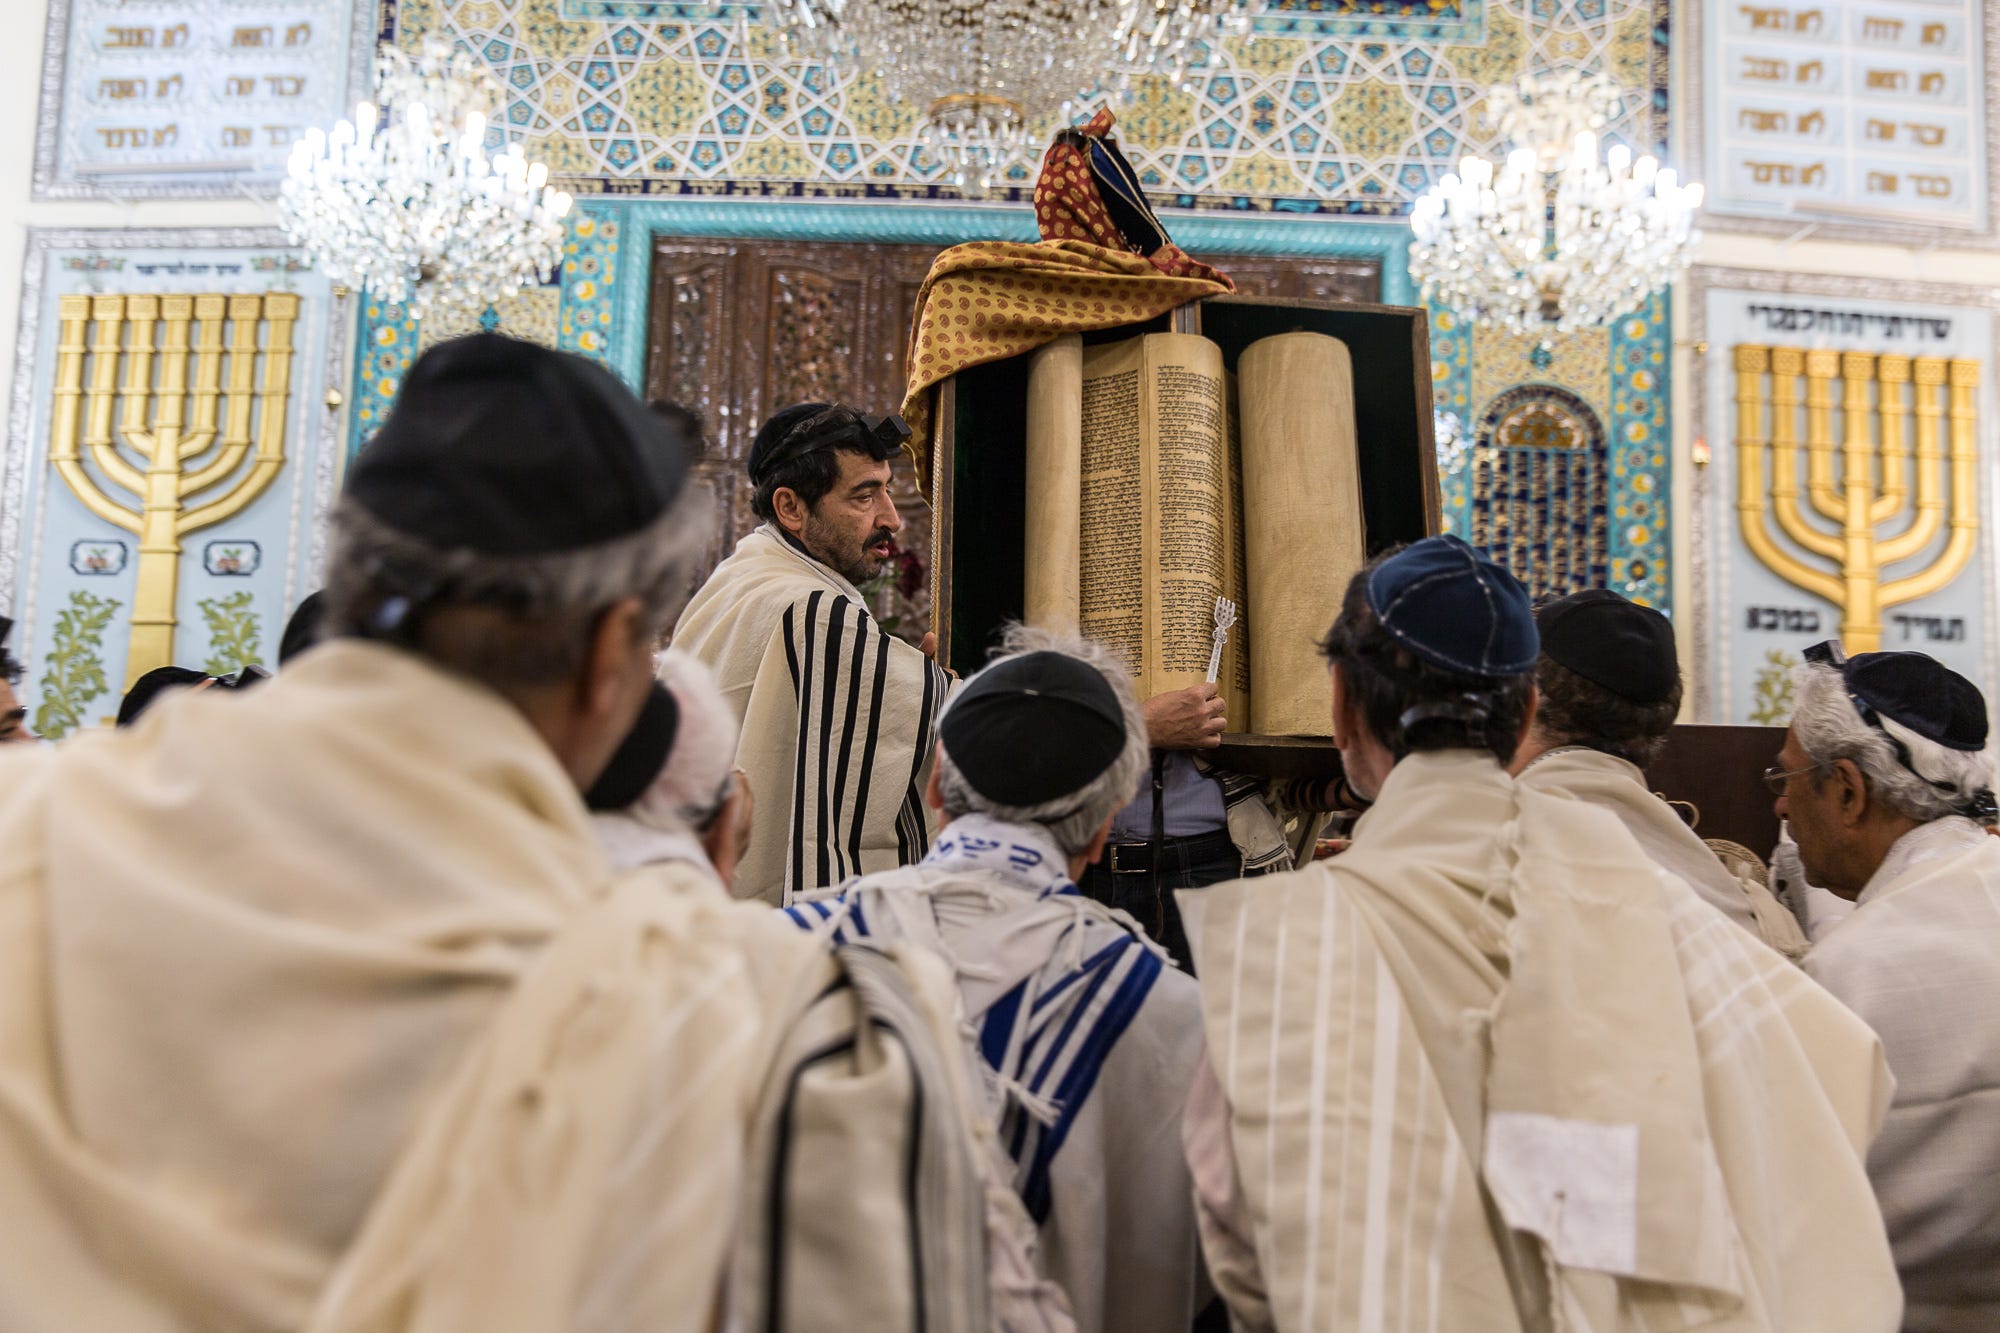 Jews have been in Iran since about the 8th century BC. They used to be scattered all over the country but are now largely concentrated in Tehran and other big cities such as Isfahan and Shiraz.